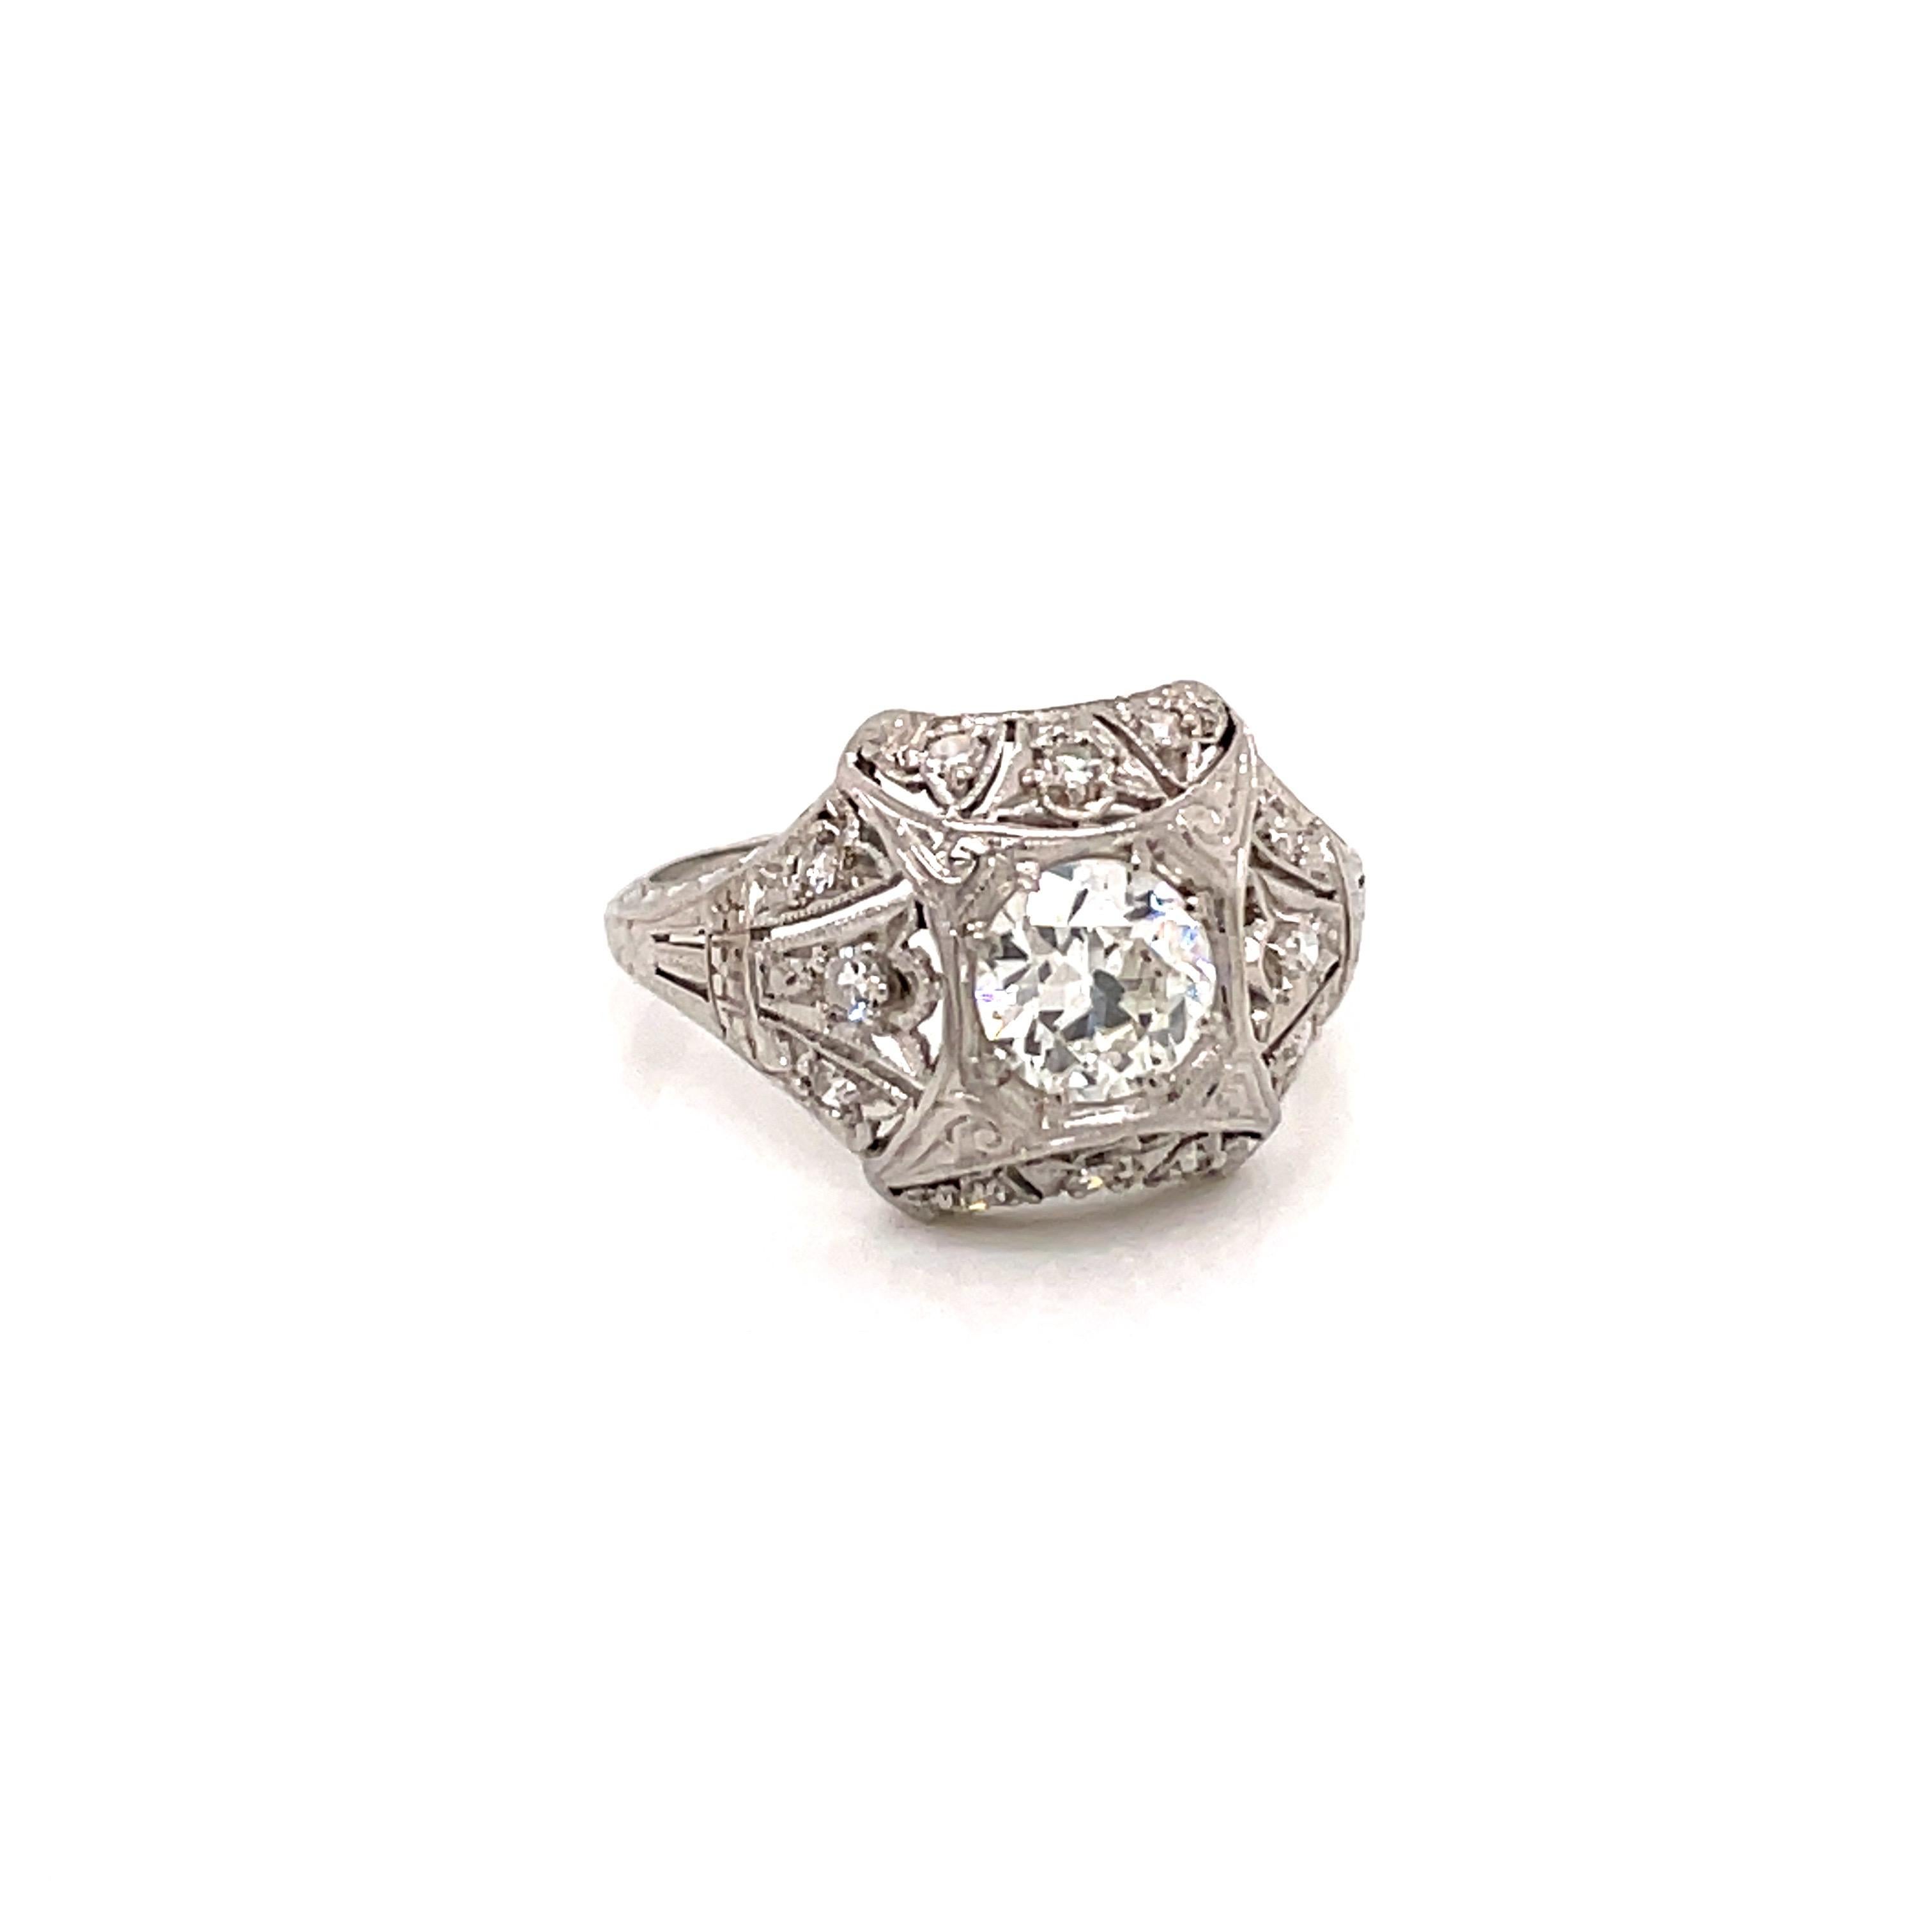 Antique 1920s Platinum Diamond Engagement Ring - The center old European Cut diamond weighs .74ct and is I color and VS2 clarity. The ornate filigree setting contains 12 single cut diamonds with an approximate weight of .18ct. The platinum setting